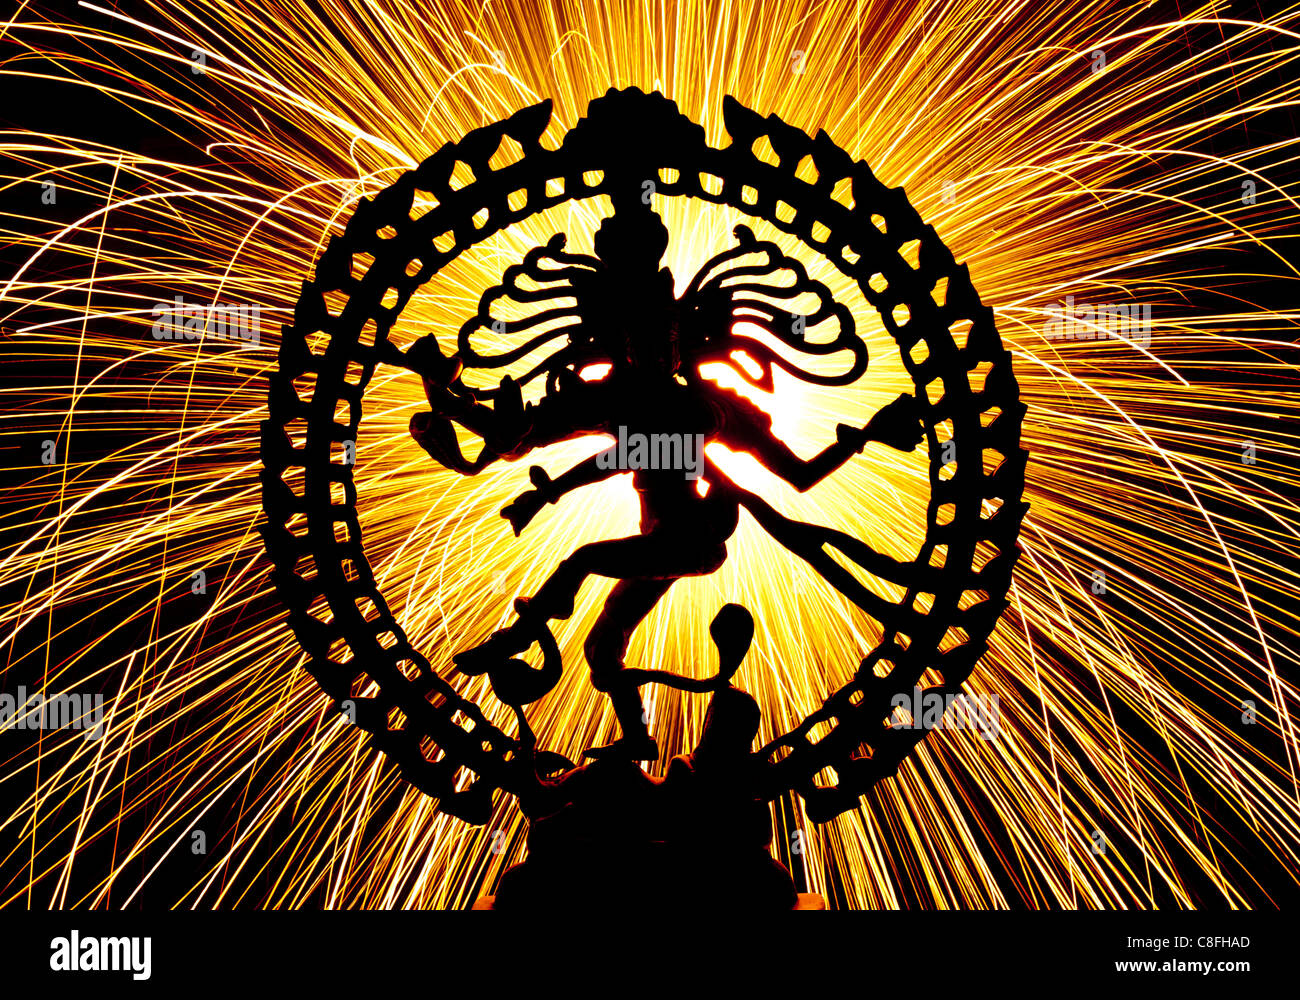 Dancing lord Shiva statue, Nataraja, in front of fireworks sparks ...